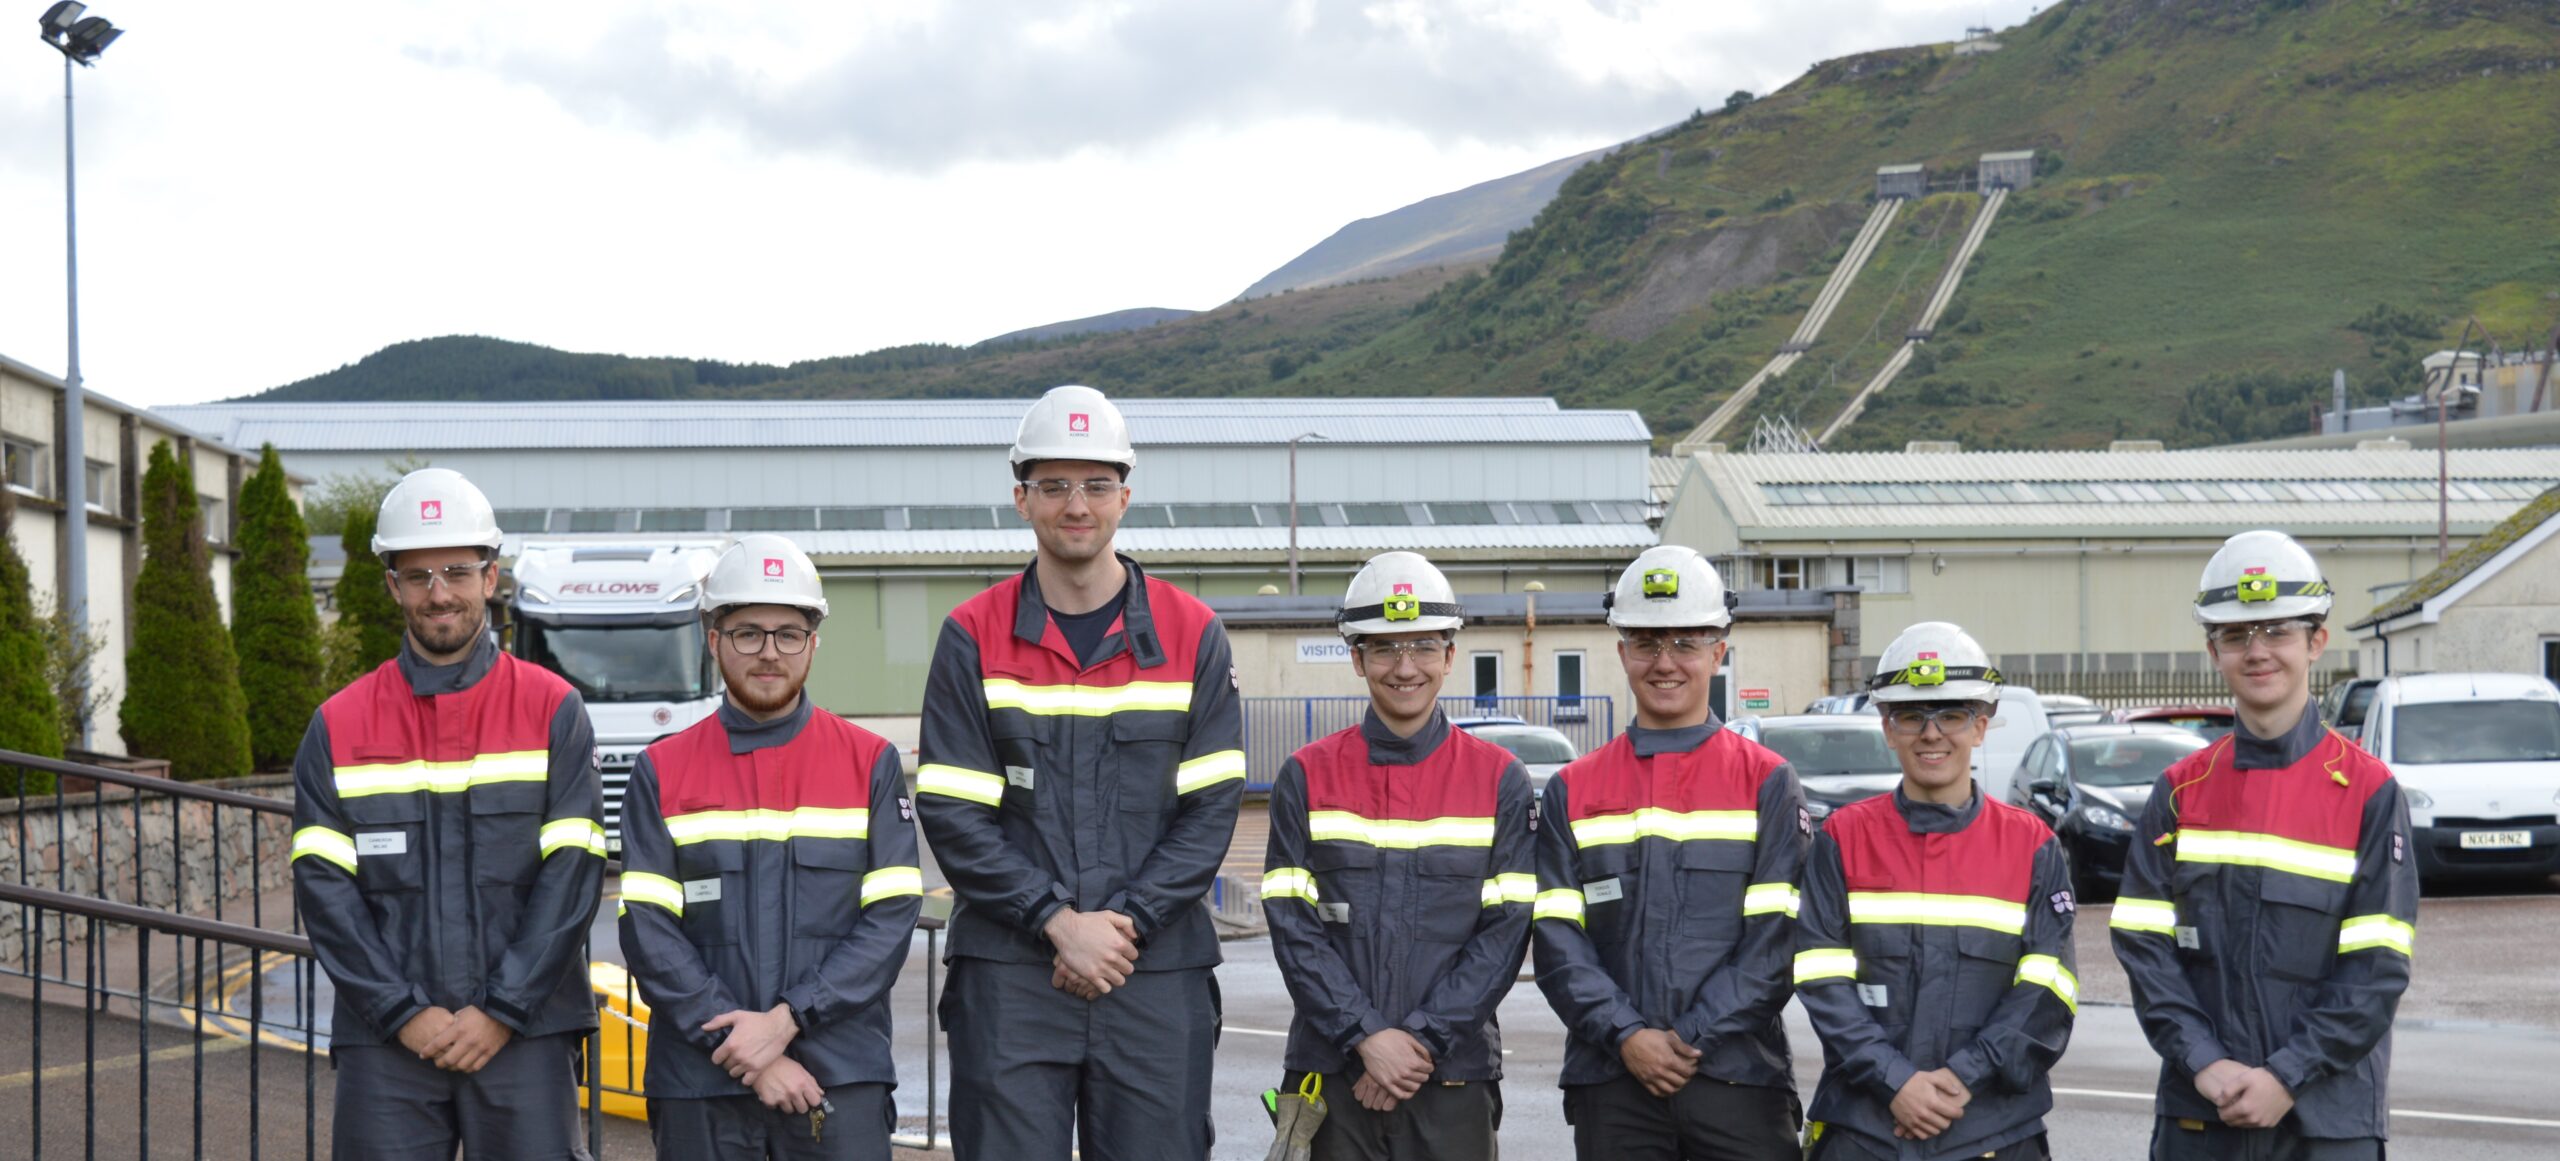 Energising Apprenticeships: ALVANCE welcomes new talent to their low carbon Aluminium smelter